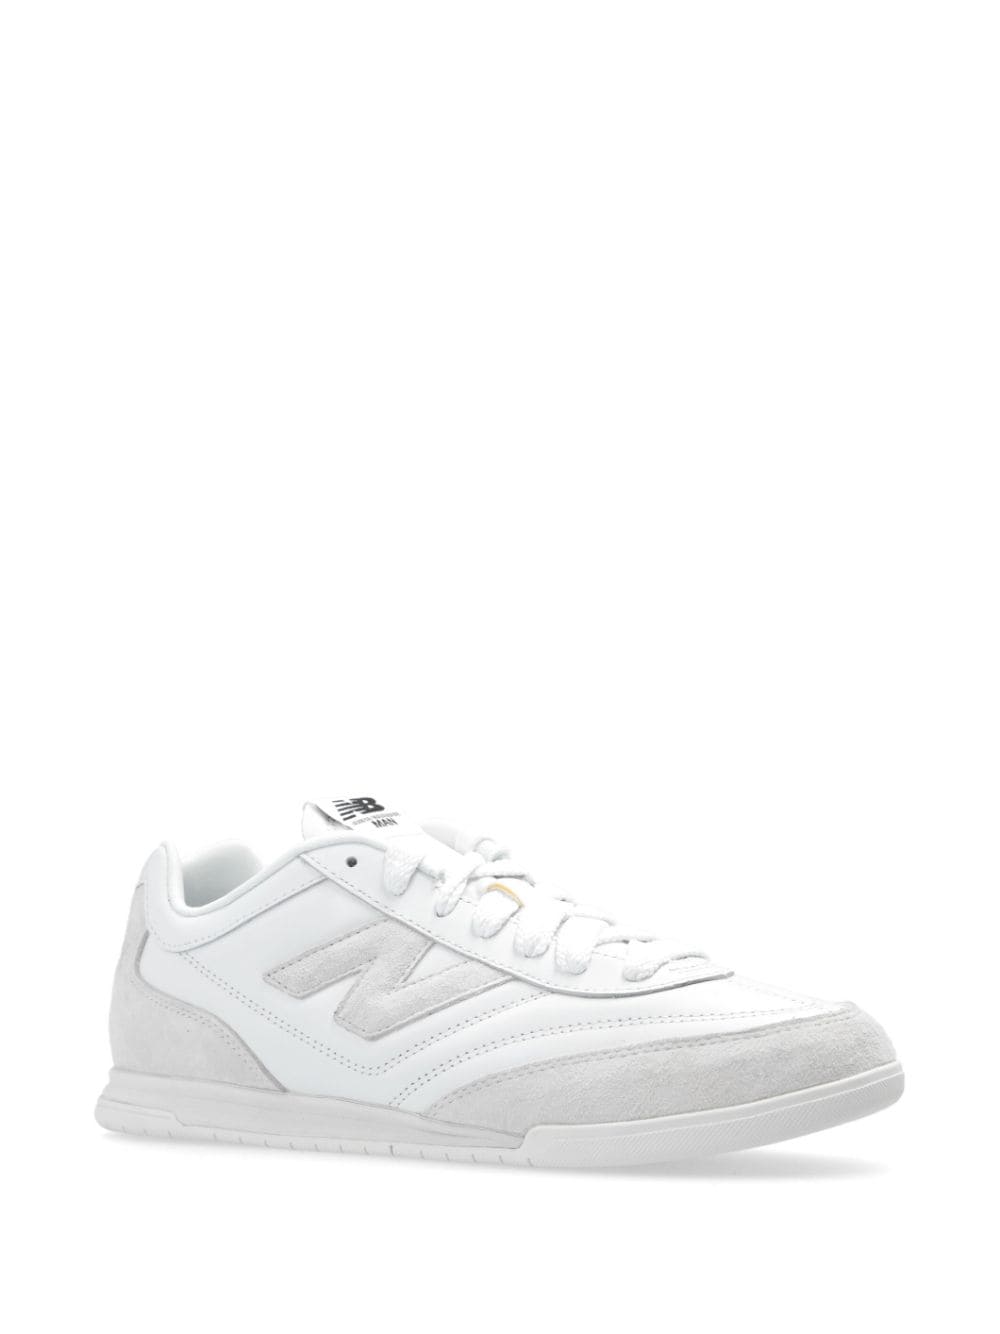 RC42 x New Balance white sneakers